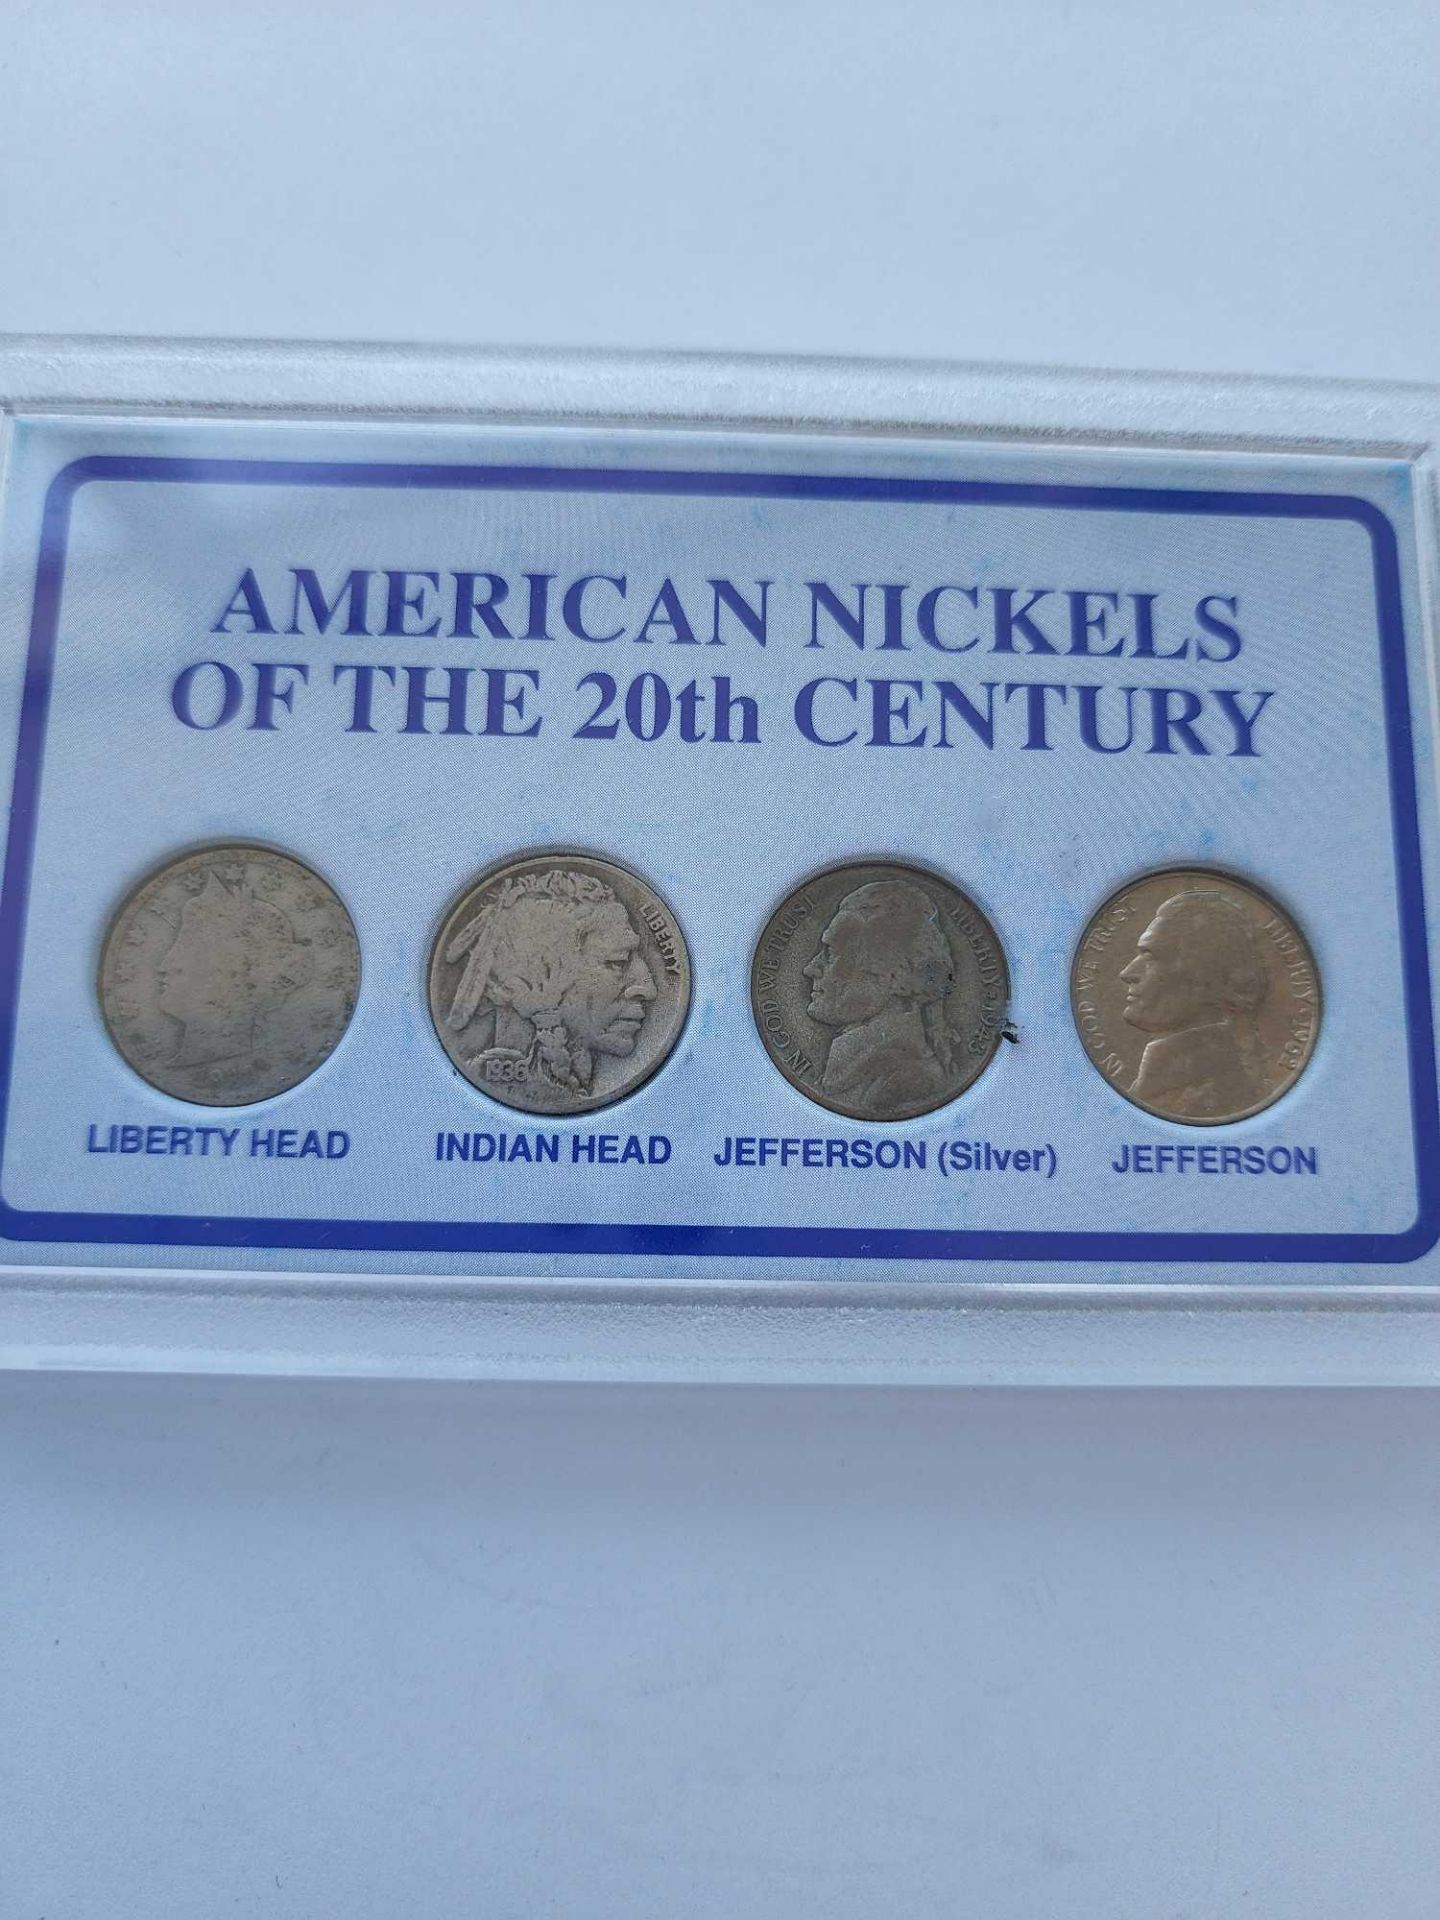 American nickels of the 20th century - Image 3 of 3